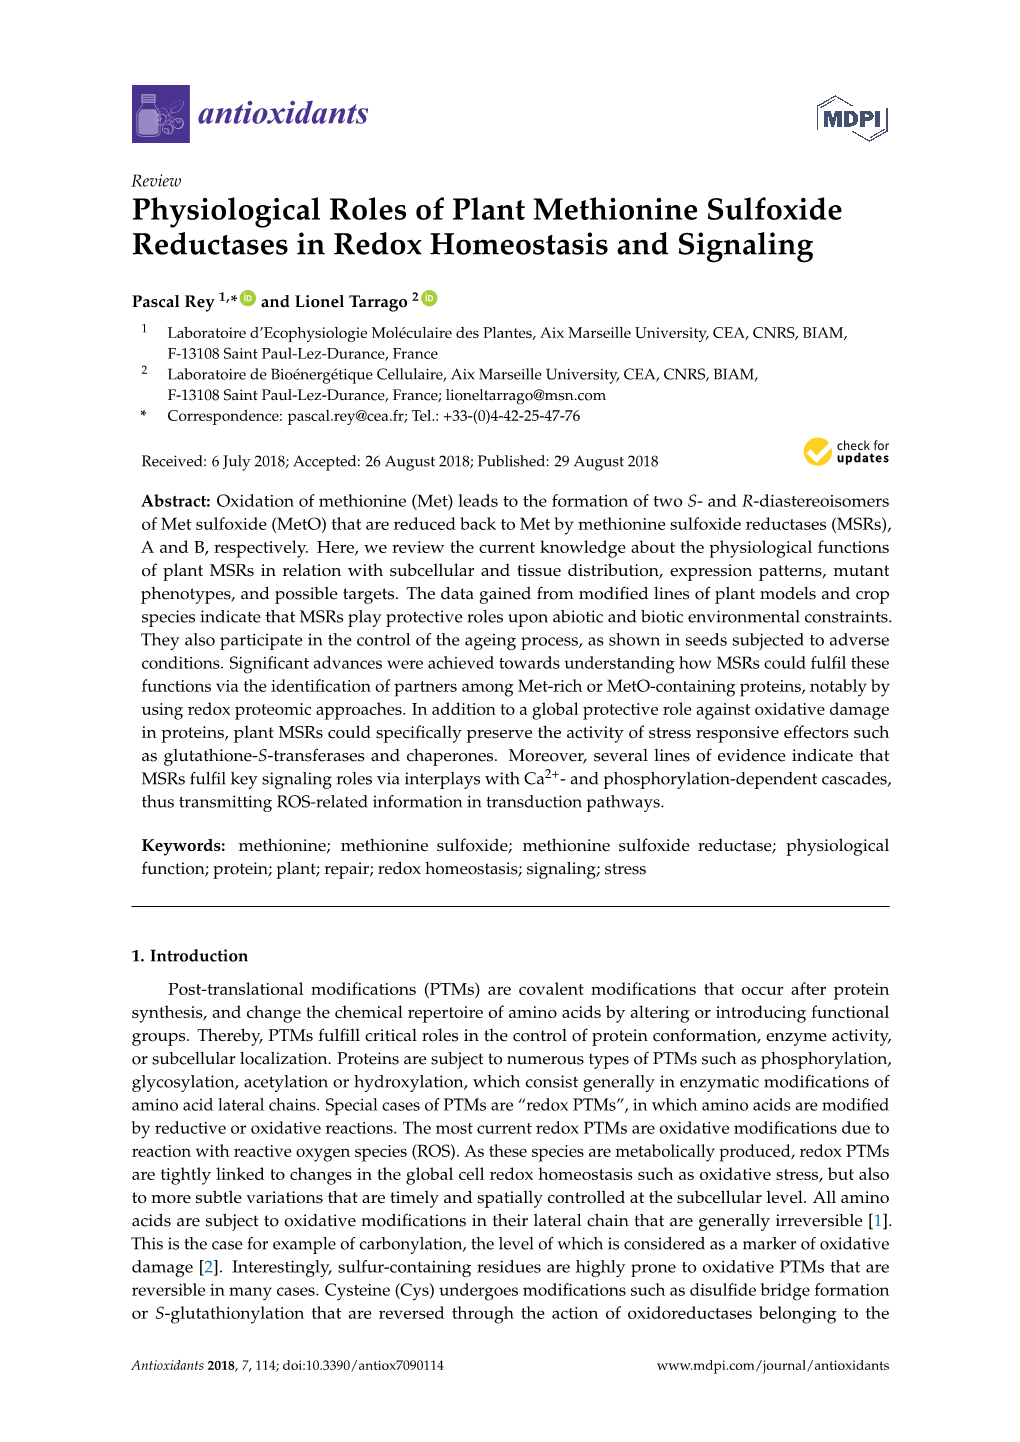 Physiological Roles of Plant Methionine Sulfoxide Reductases in Redox Homeostasis and Signaling